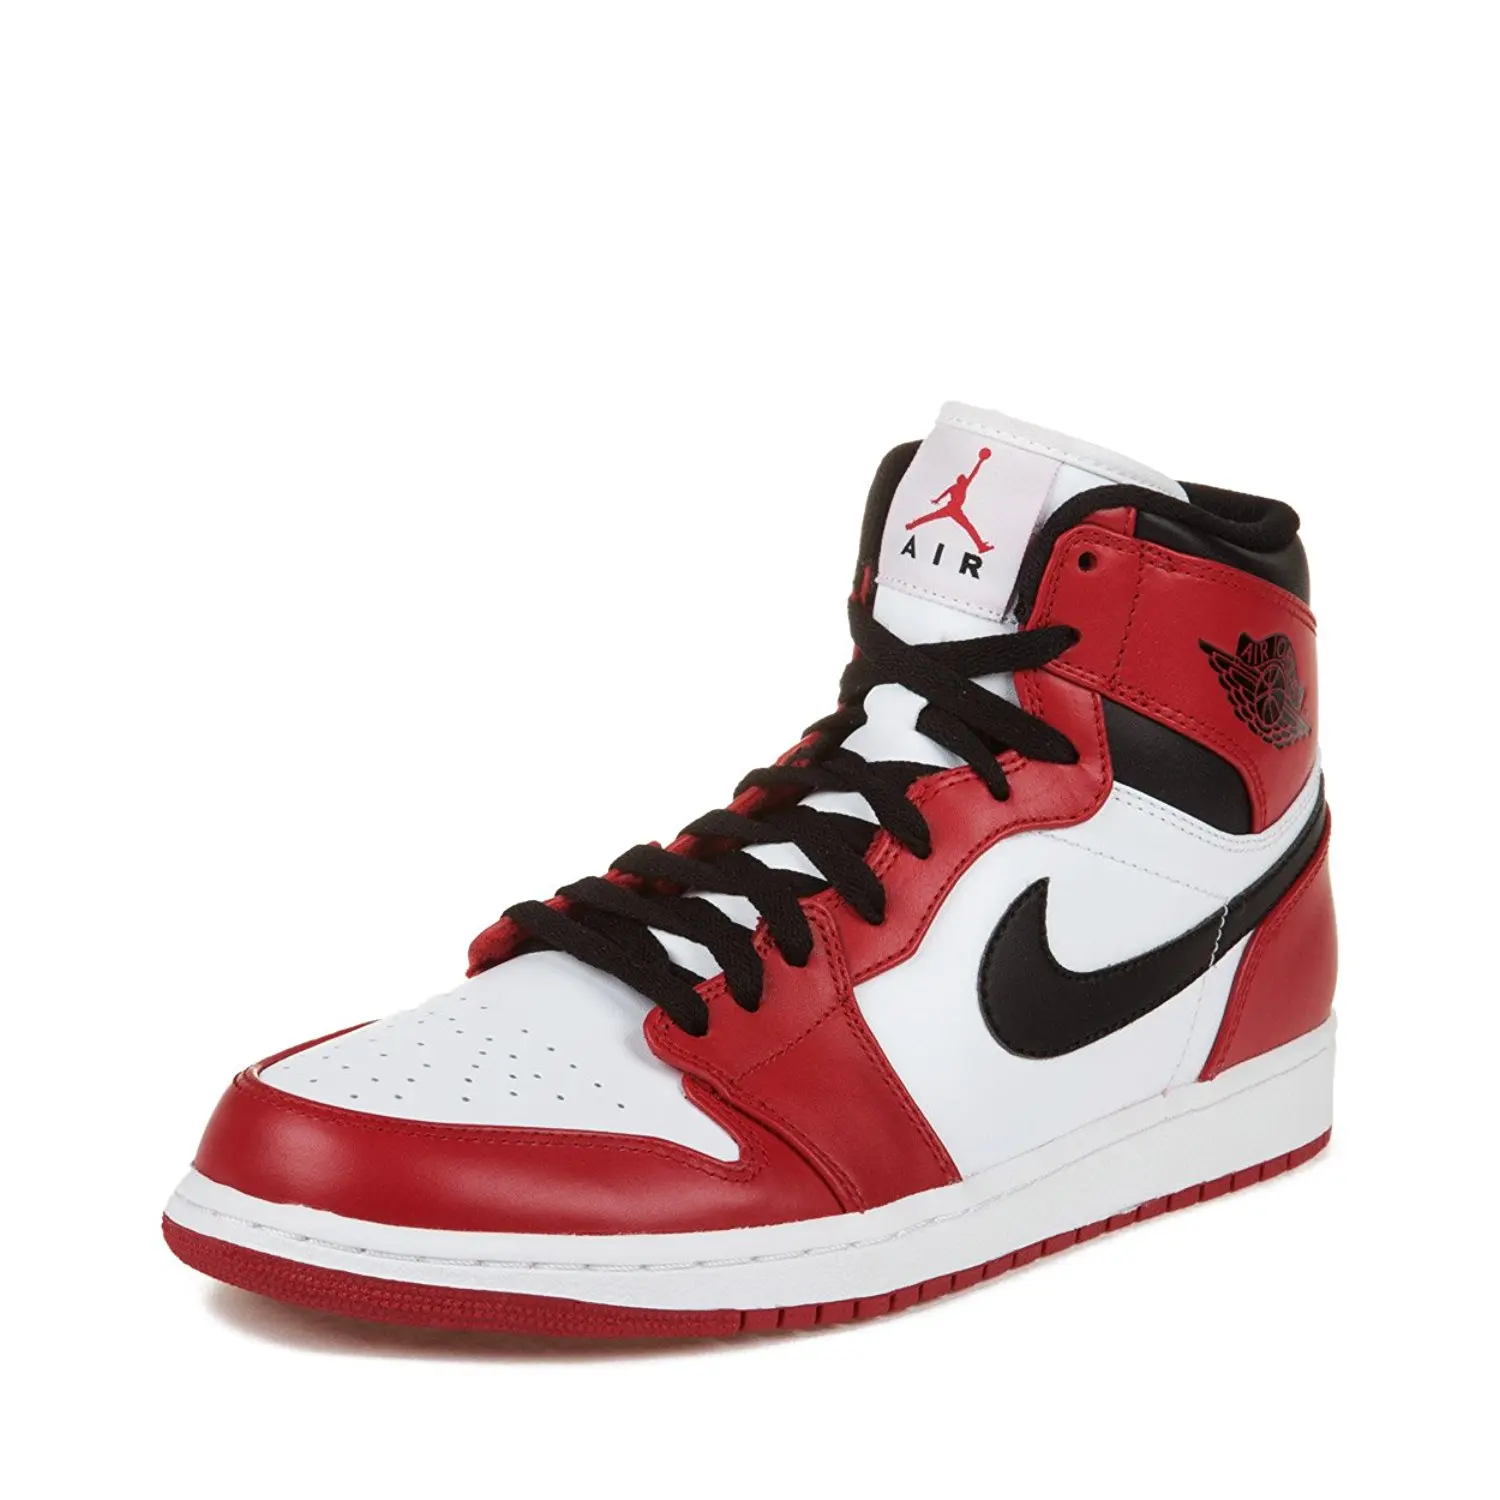 Cheap Jordan Shoes Black And Red, find Jordan Shoes Black And Red deals ...